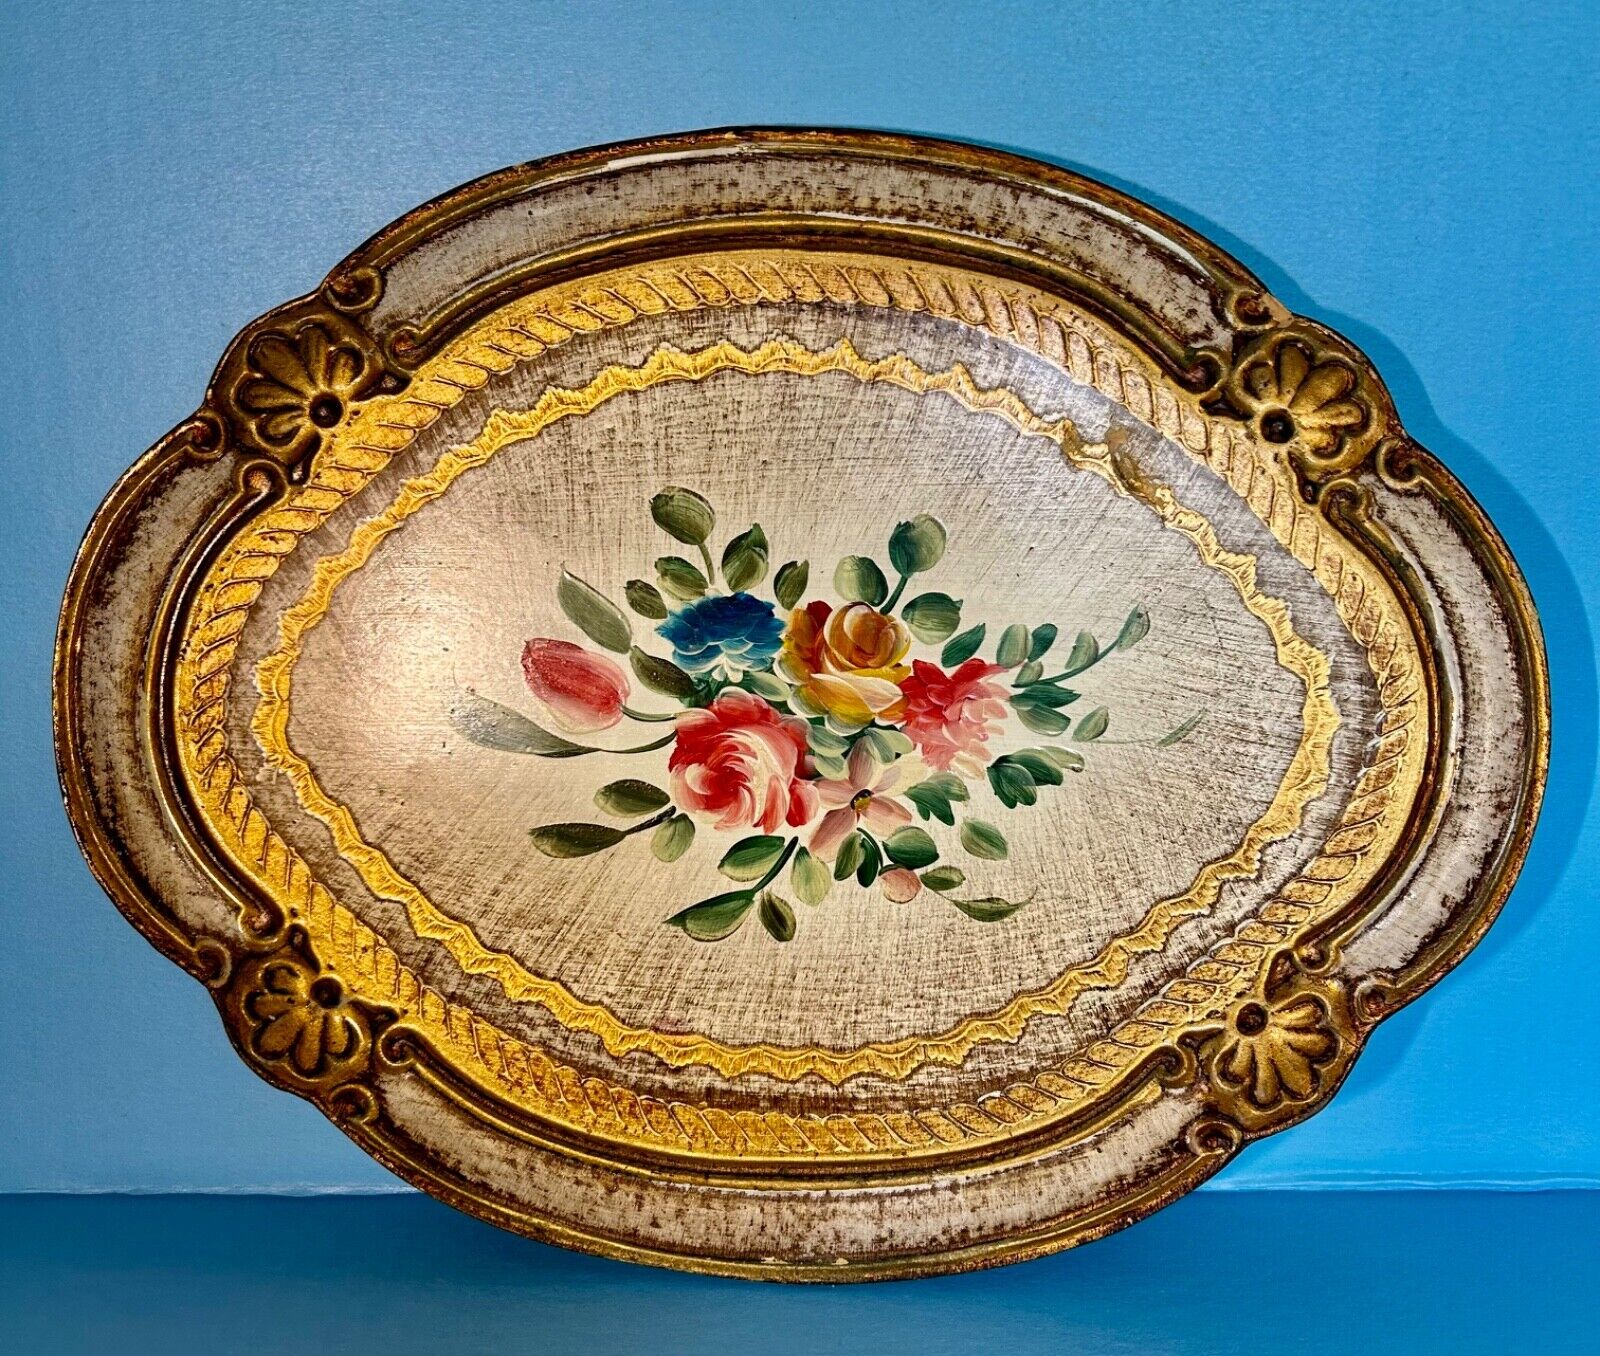 VTG Italian Wood Tray Hand Painted Legno Lavorato A Mano Wood Gold Leaf Tray